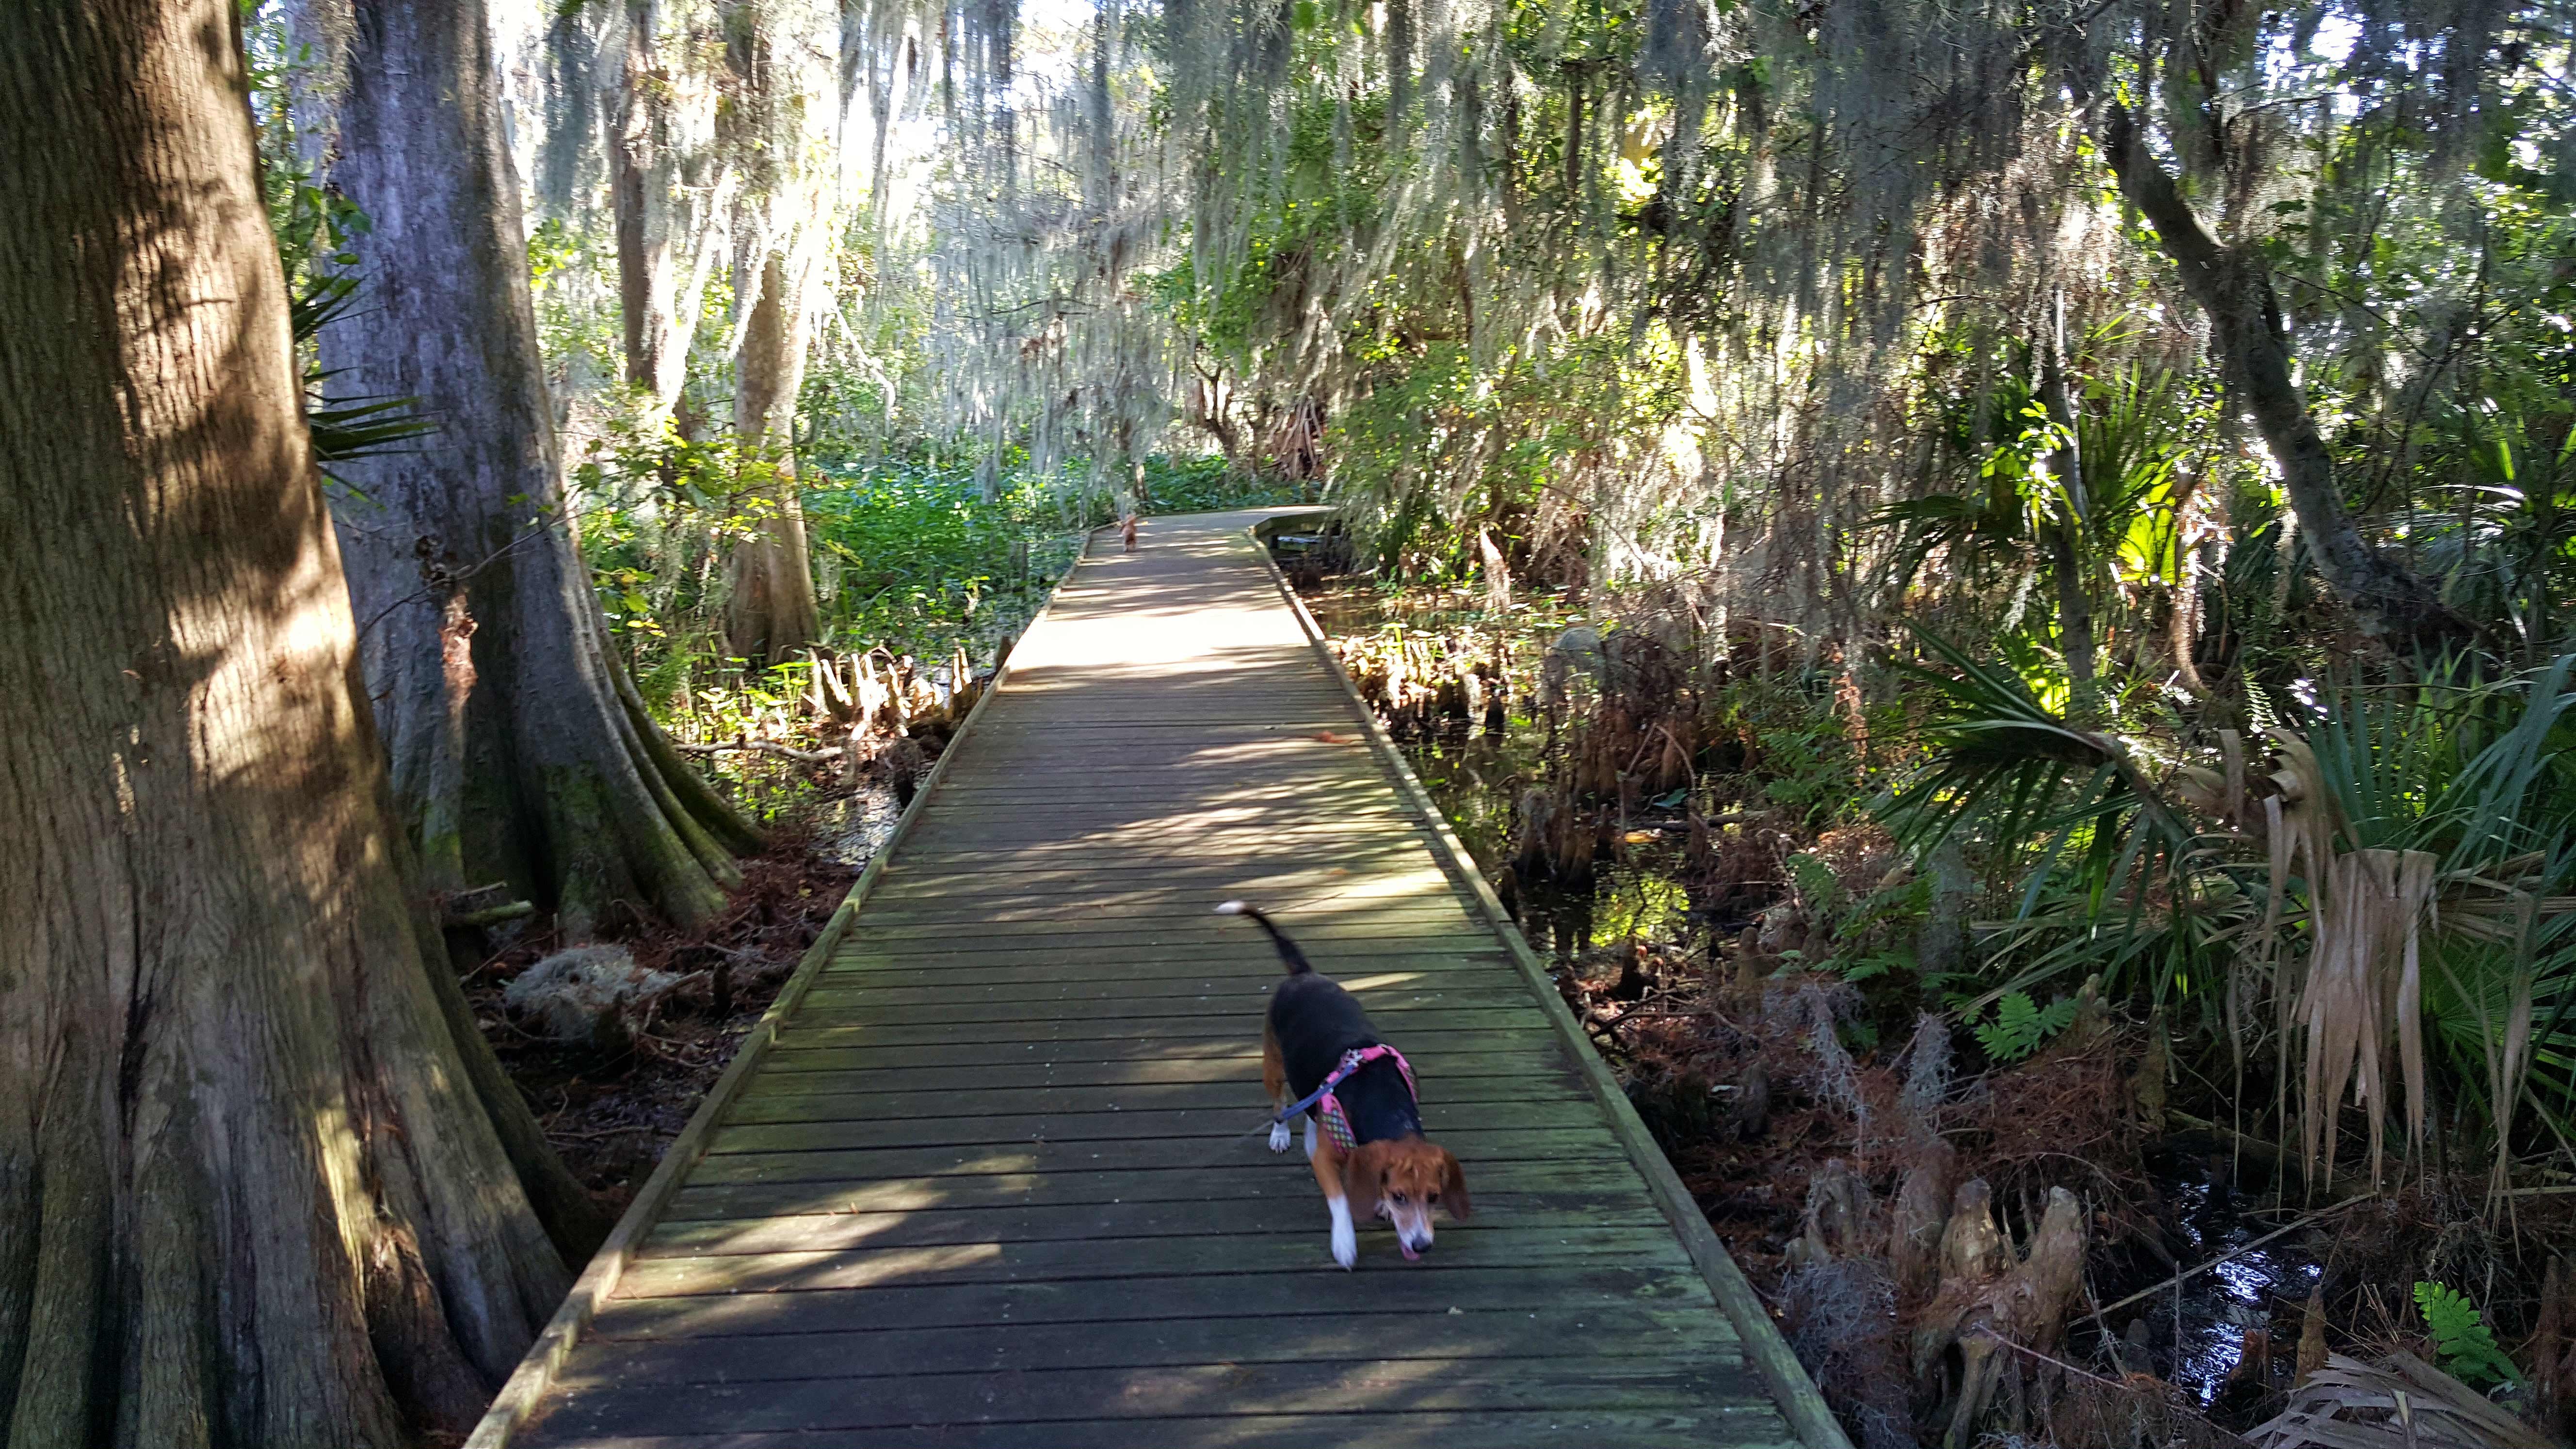 Beautiful boardwalk through the park and is pet friendly.
Pet's must be leashed at all times!